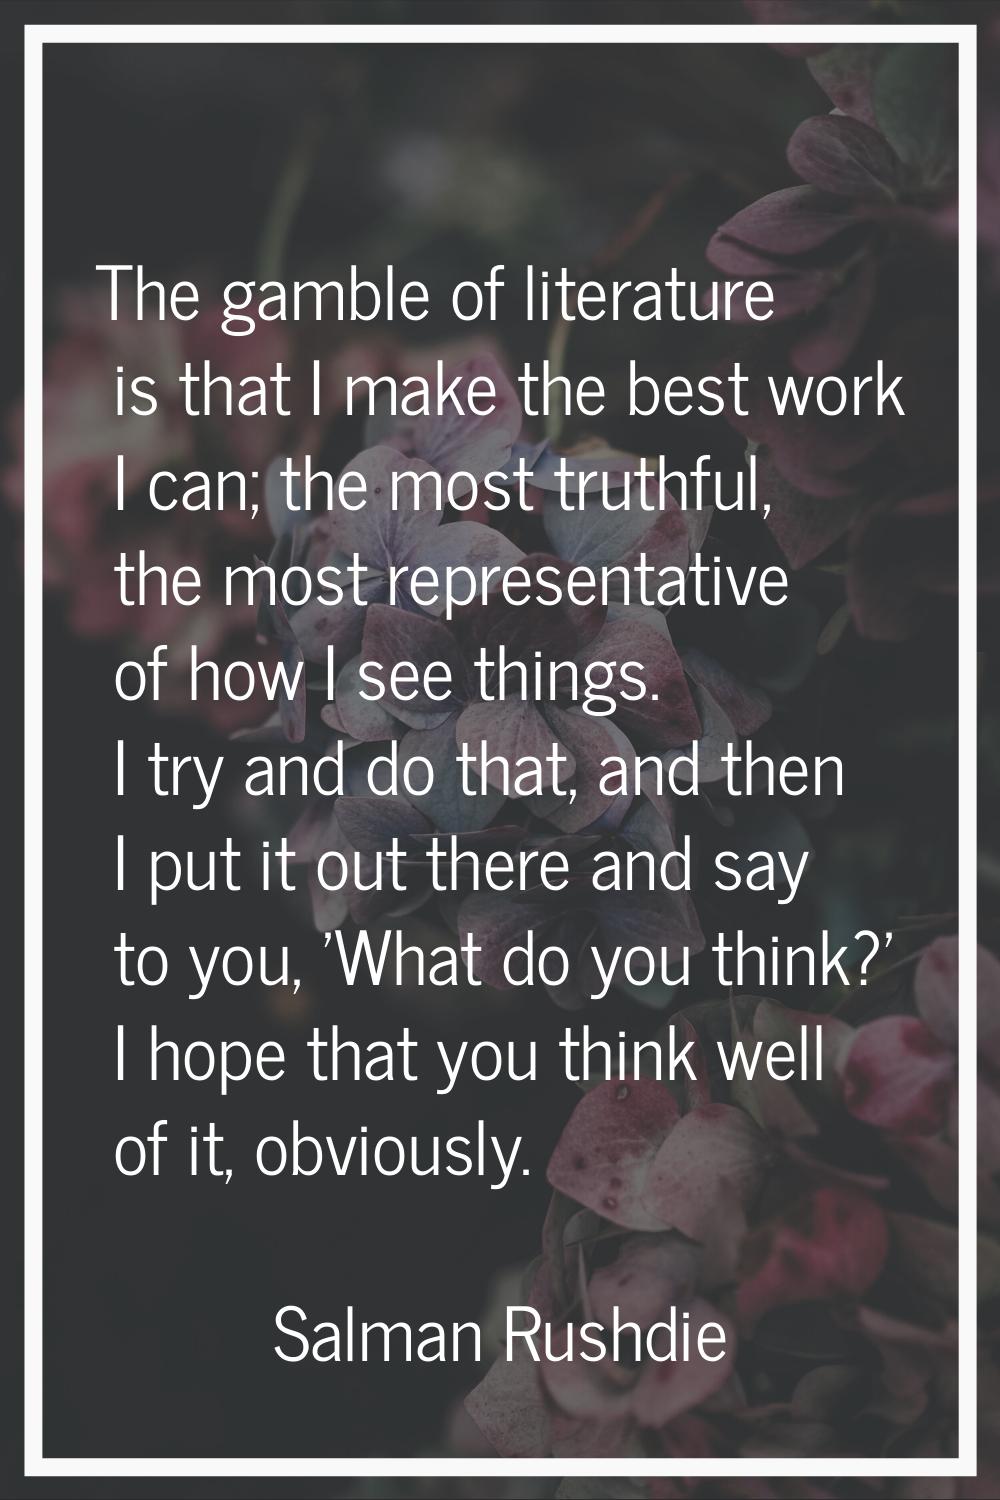 The gamble of literature is that I make the best work I can; the most truthful, the most representa